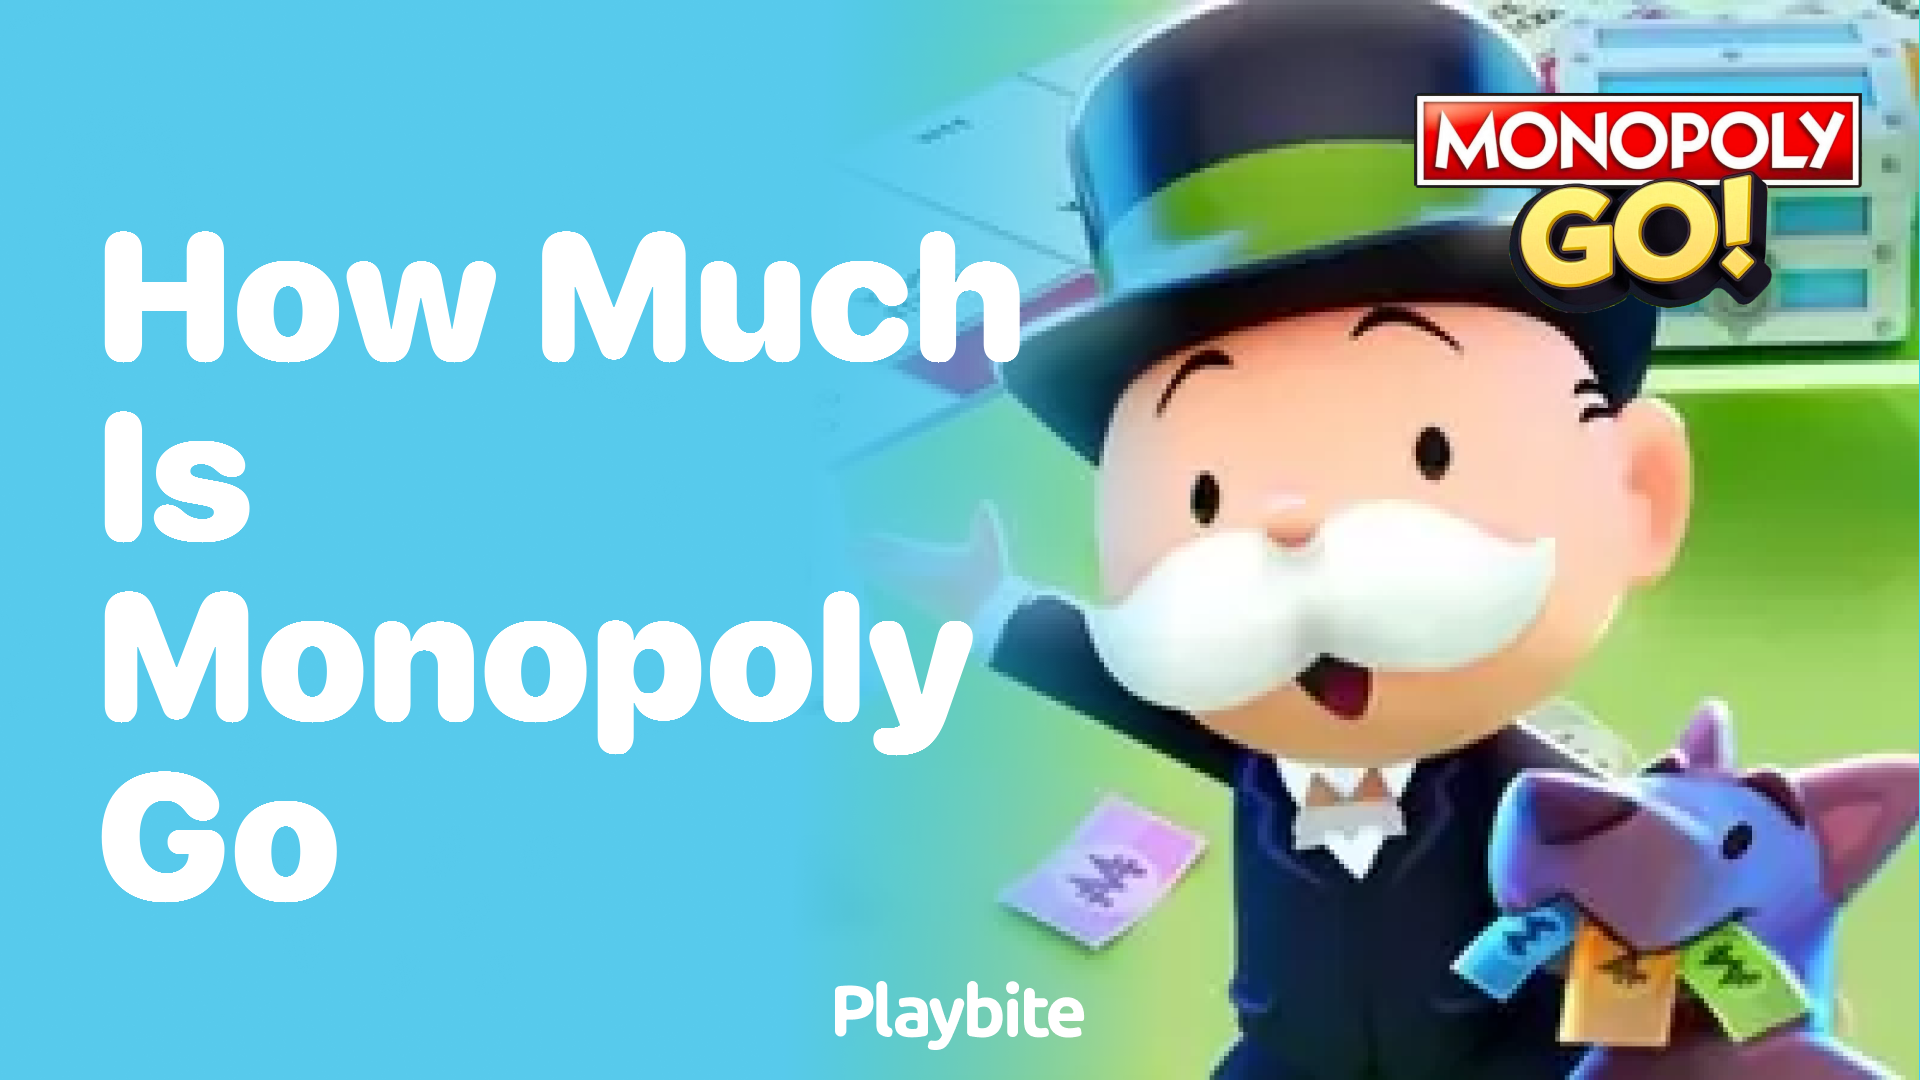 How Much Does Monopoly Go Cost?